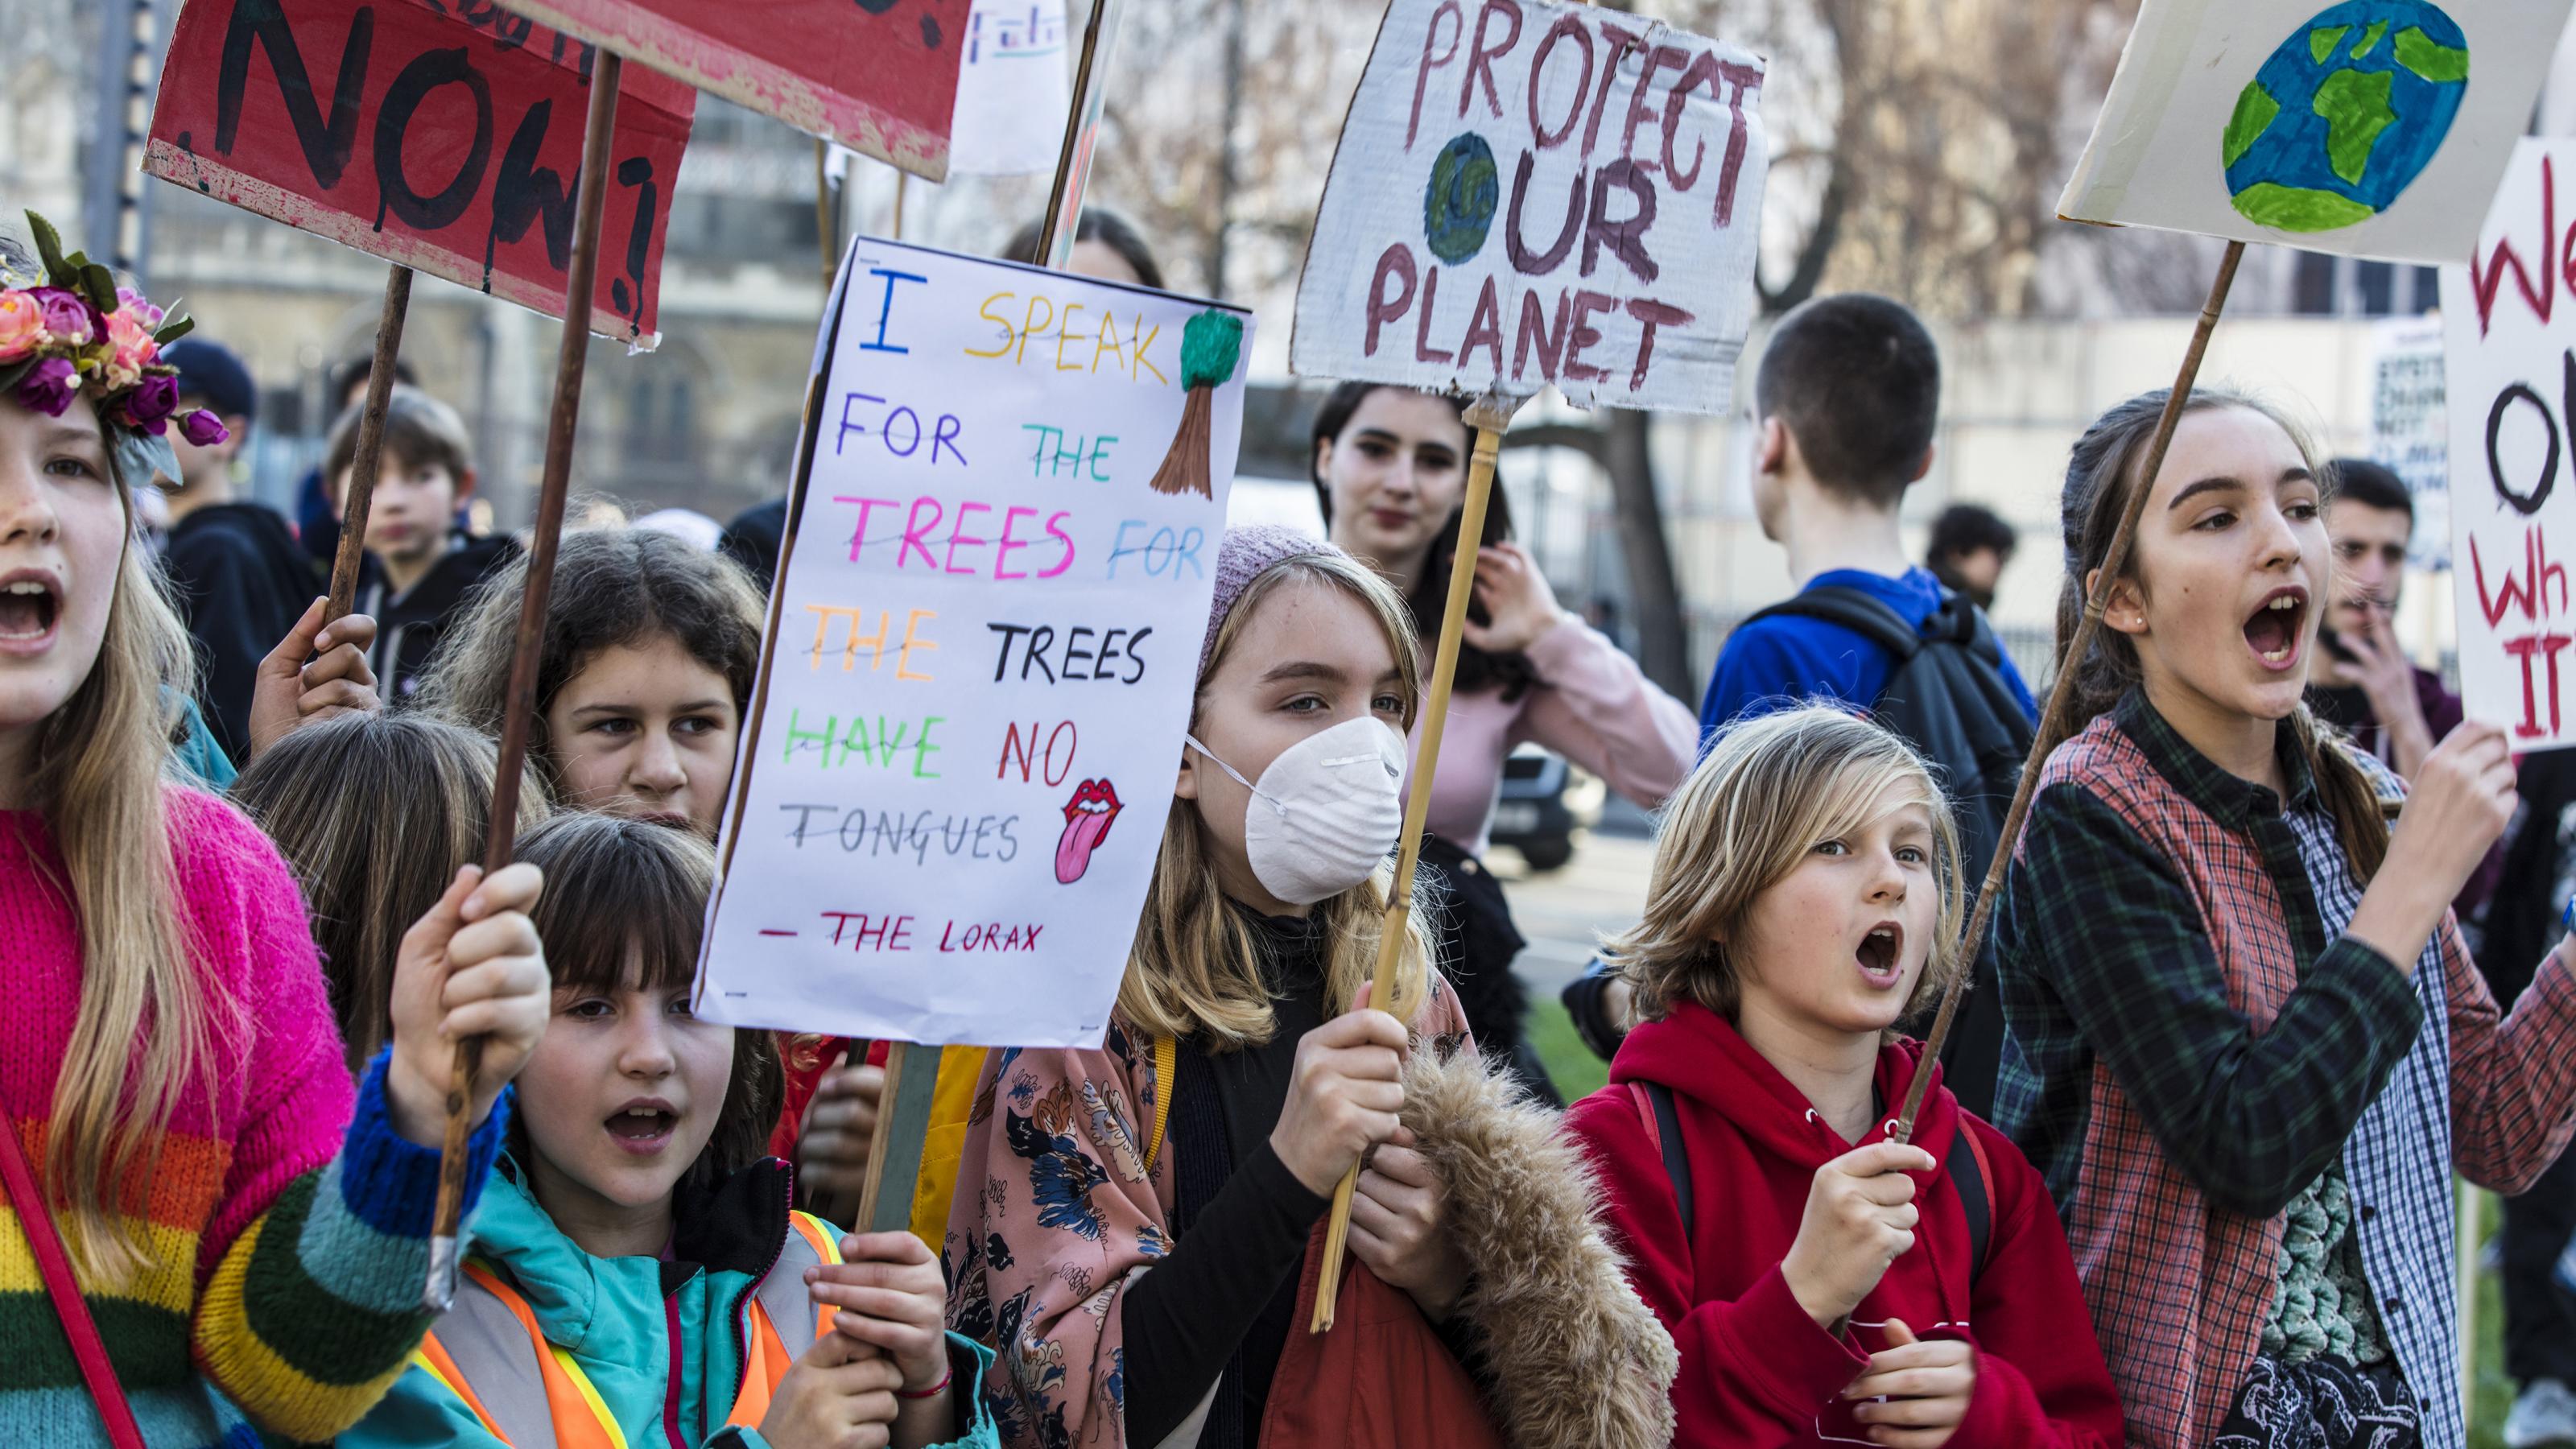 LONDON, UK – February 15, 2019: Protestors with banners at a Youth strike for climate march in central London